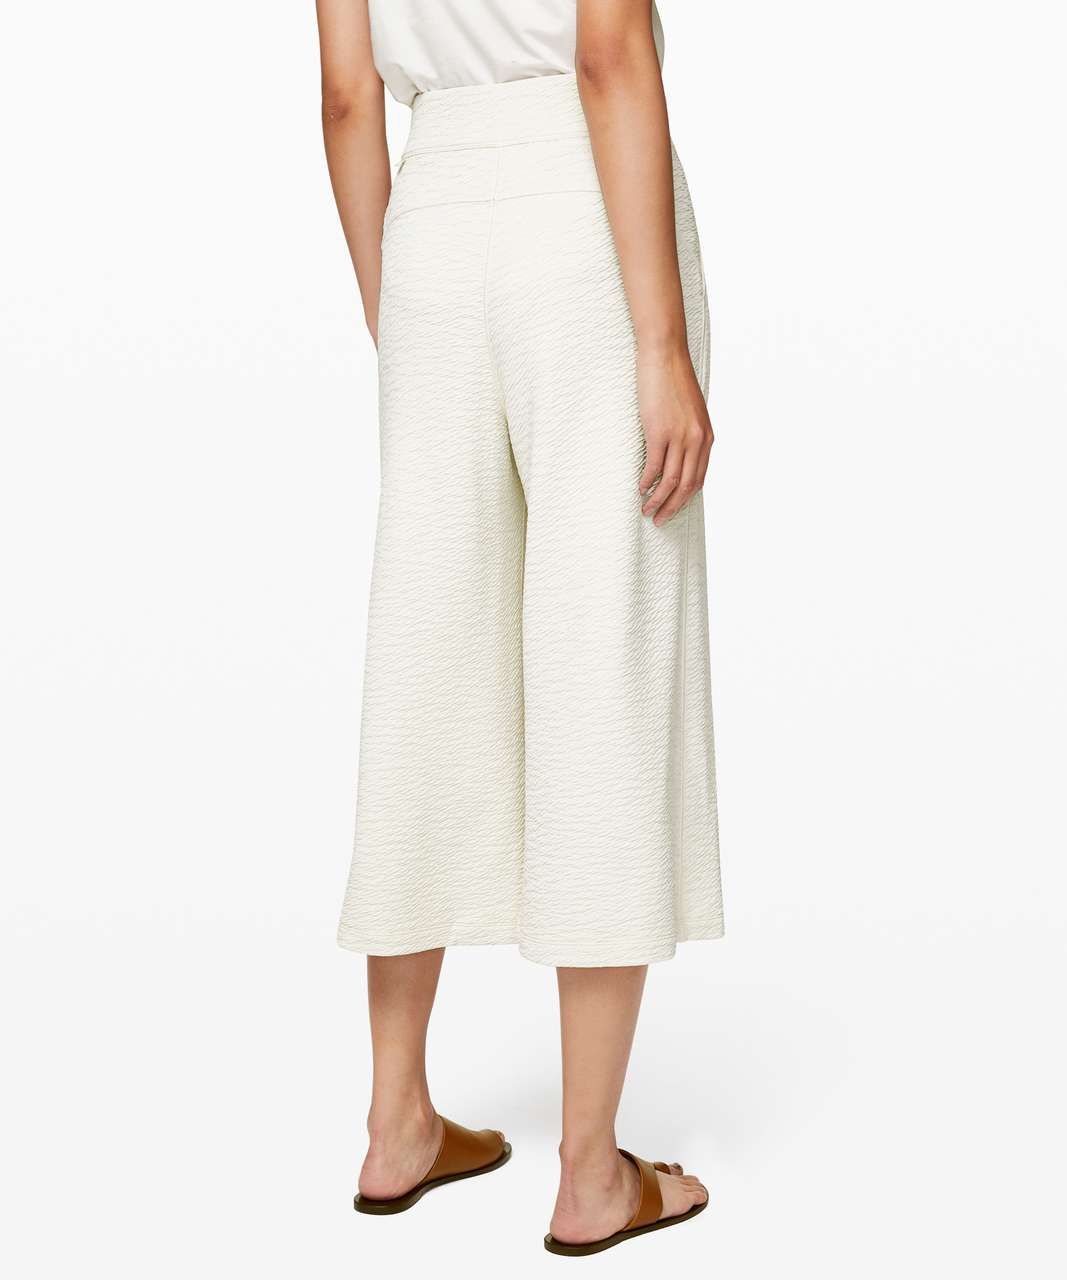 Lululemon Can You Feel The Pleat Crop - Light Ivory (First Release)